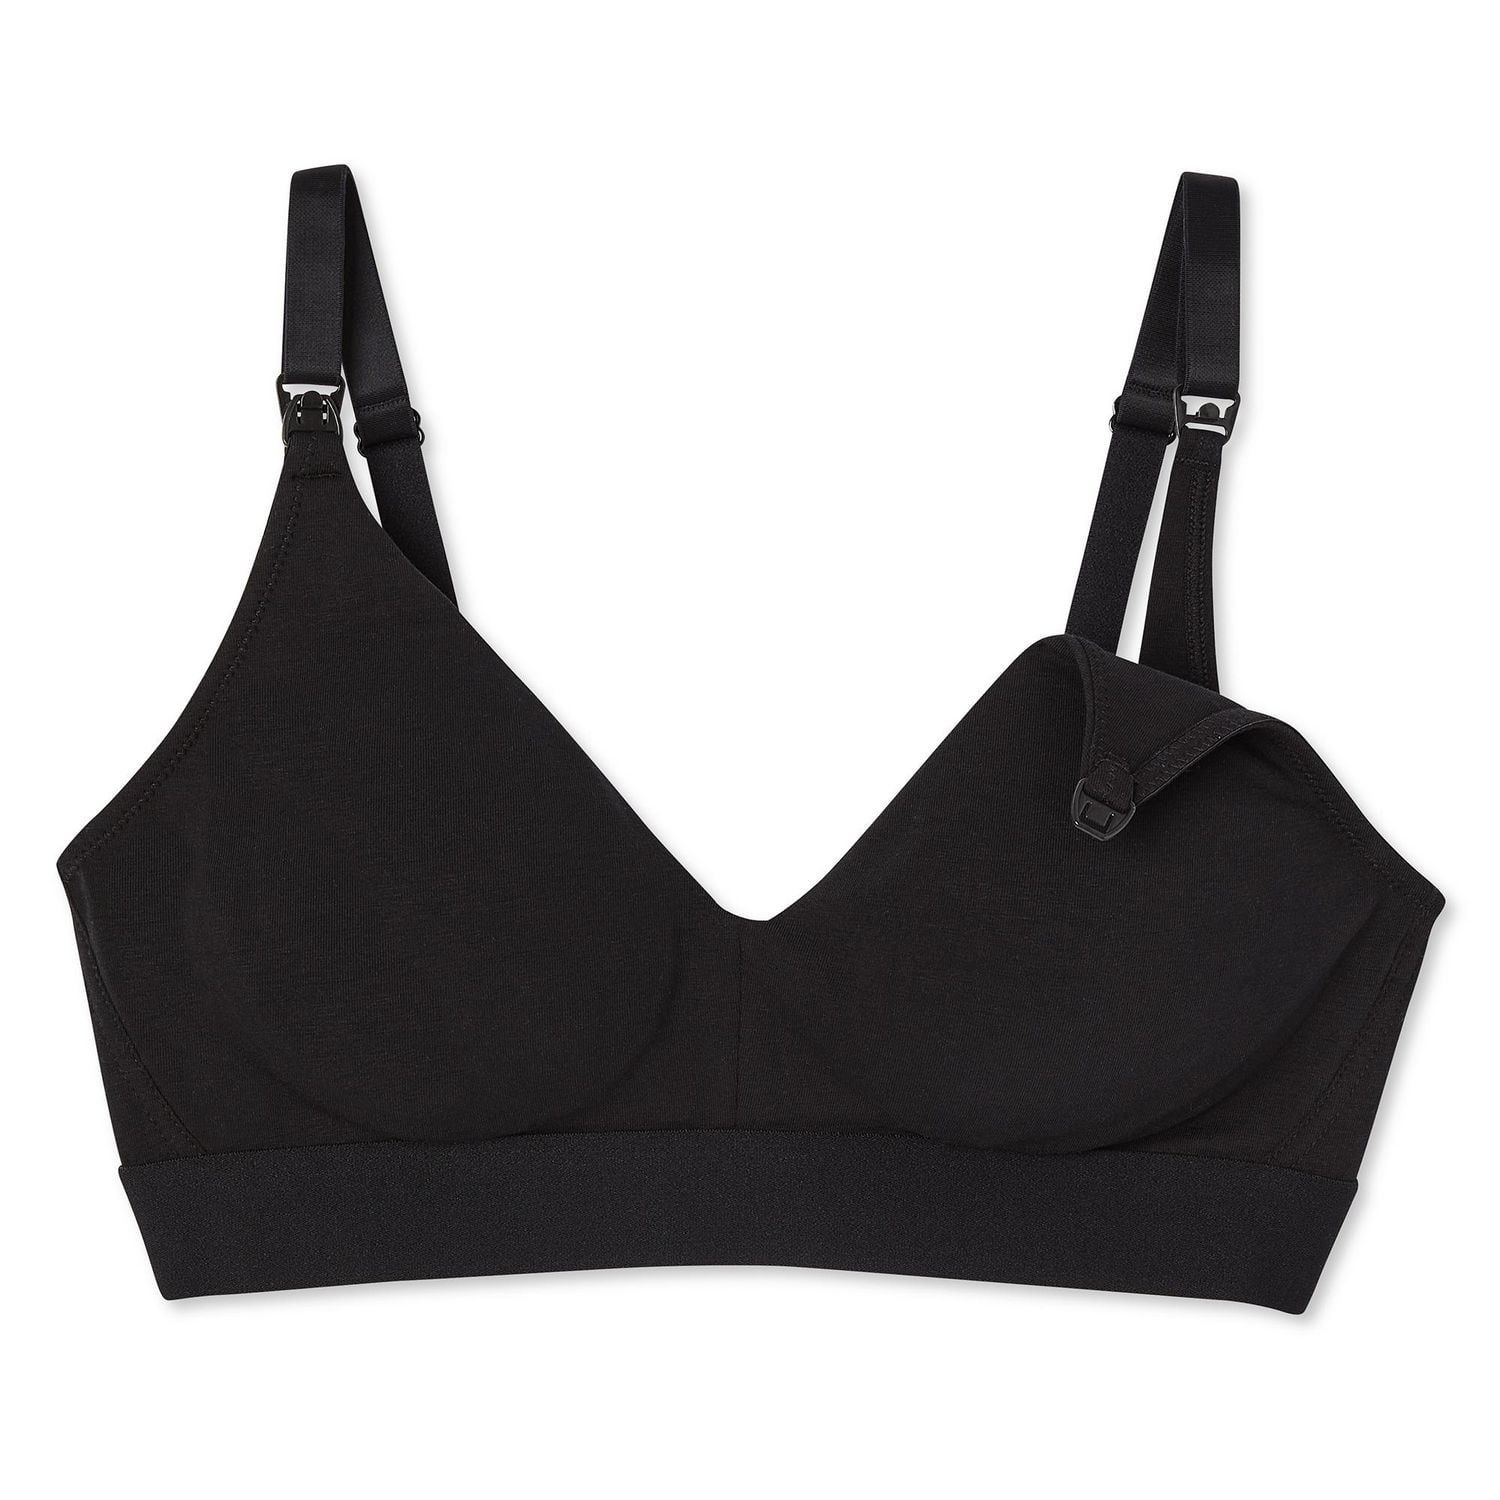 Buy Women's Solid Padded Underwire Bra with Adjustable Straps Online